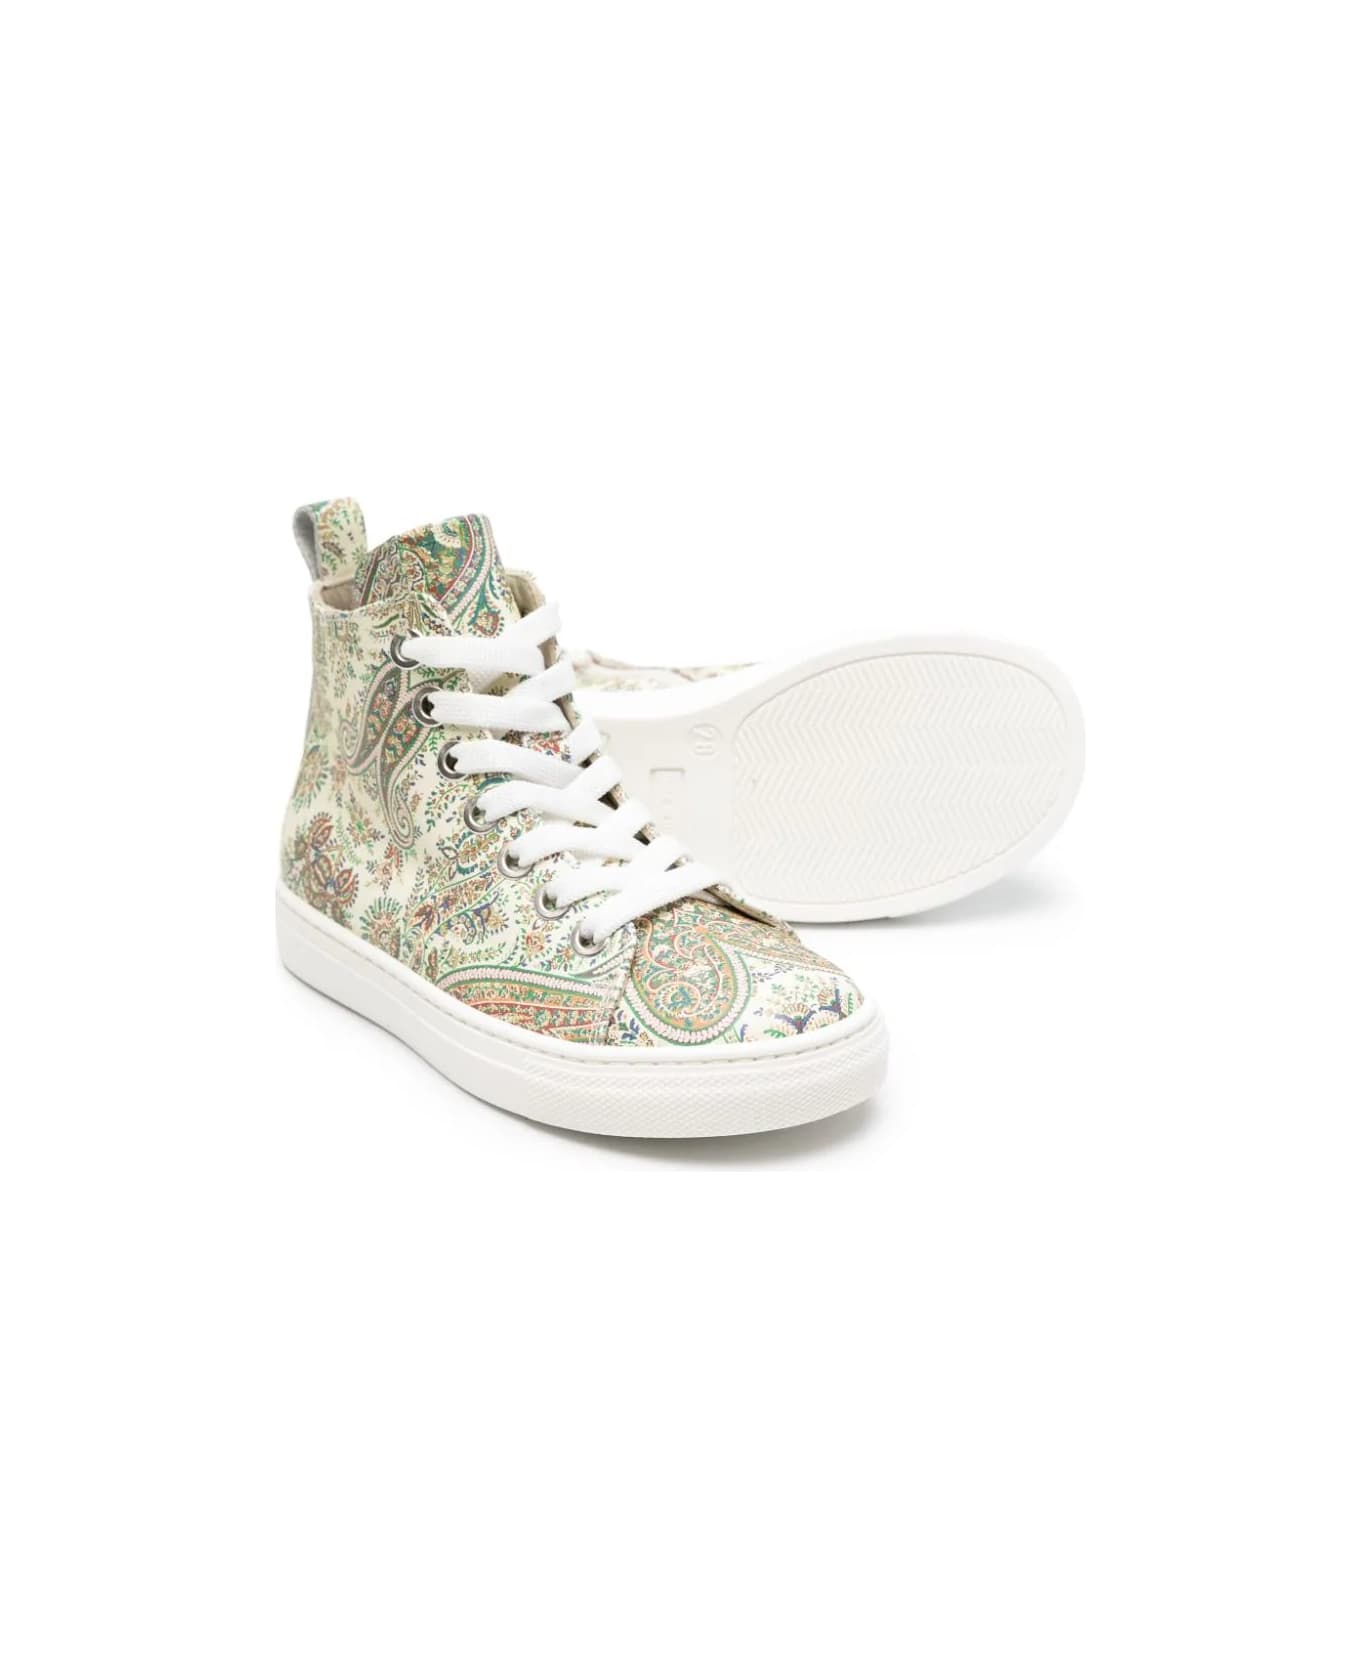 Etro High Sneakers With Multicolored Paisley Motif - Multicolour